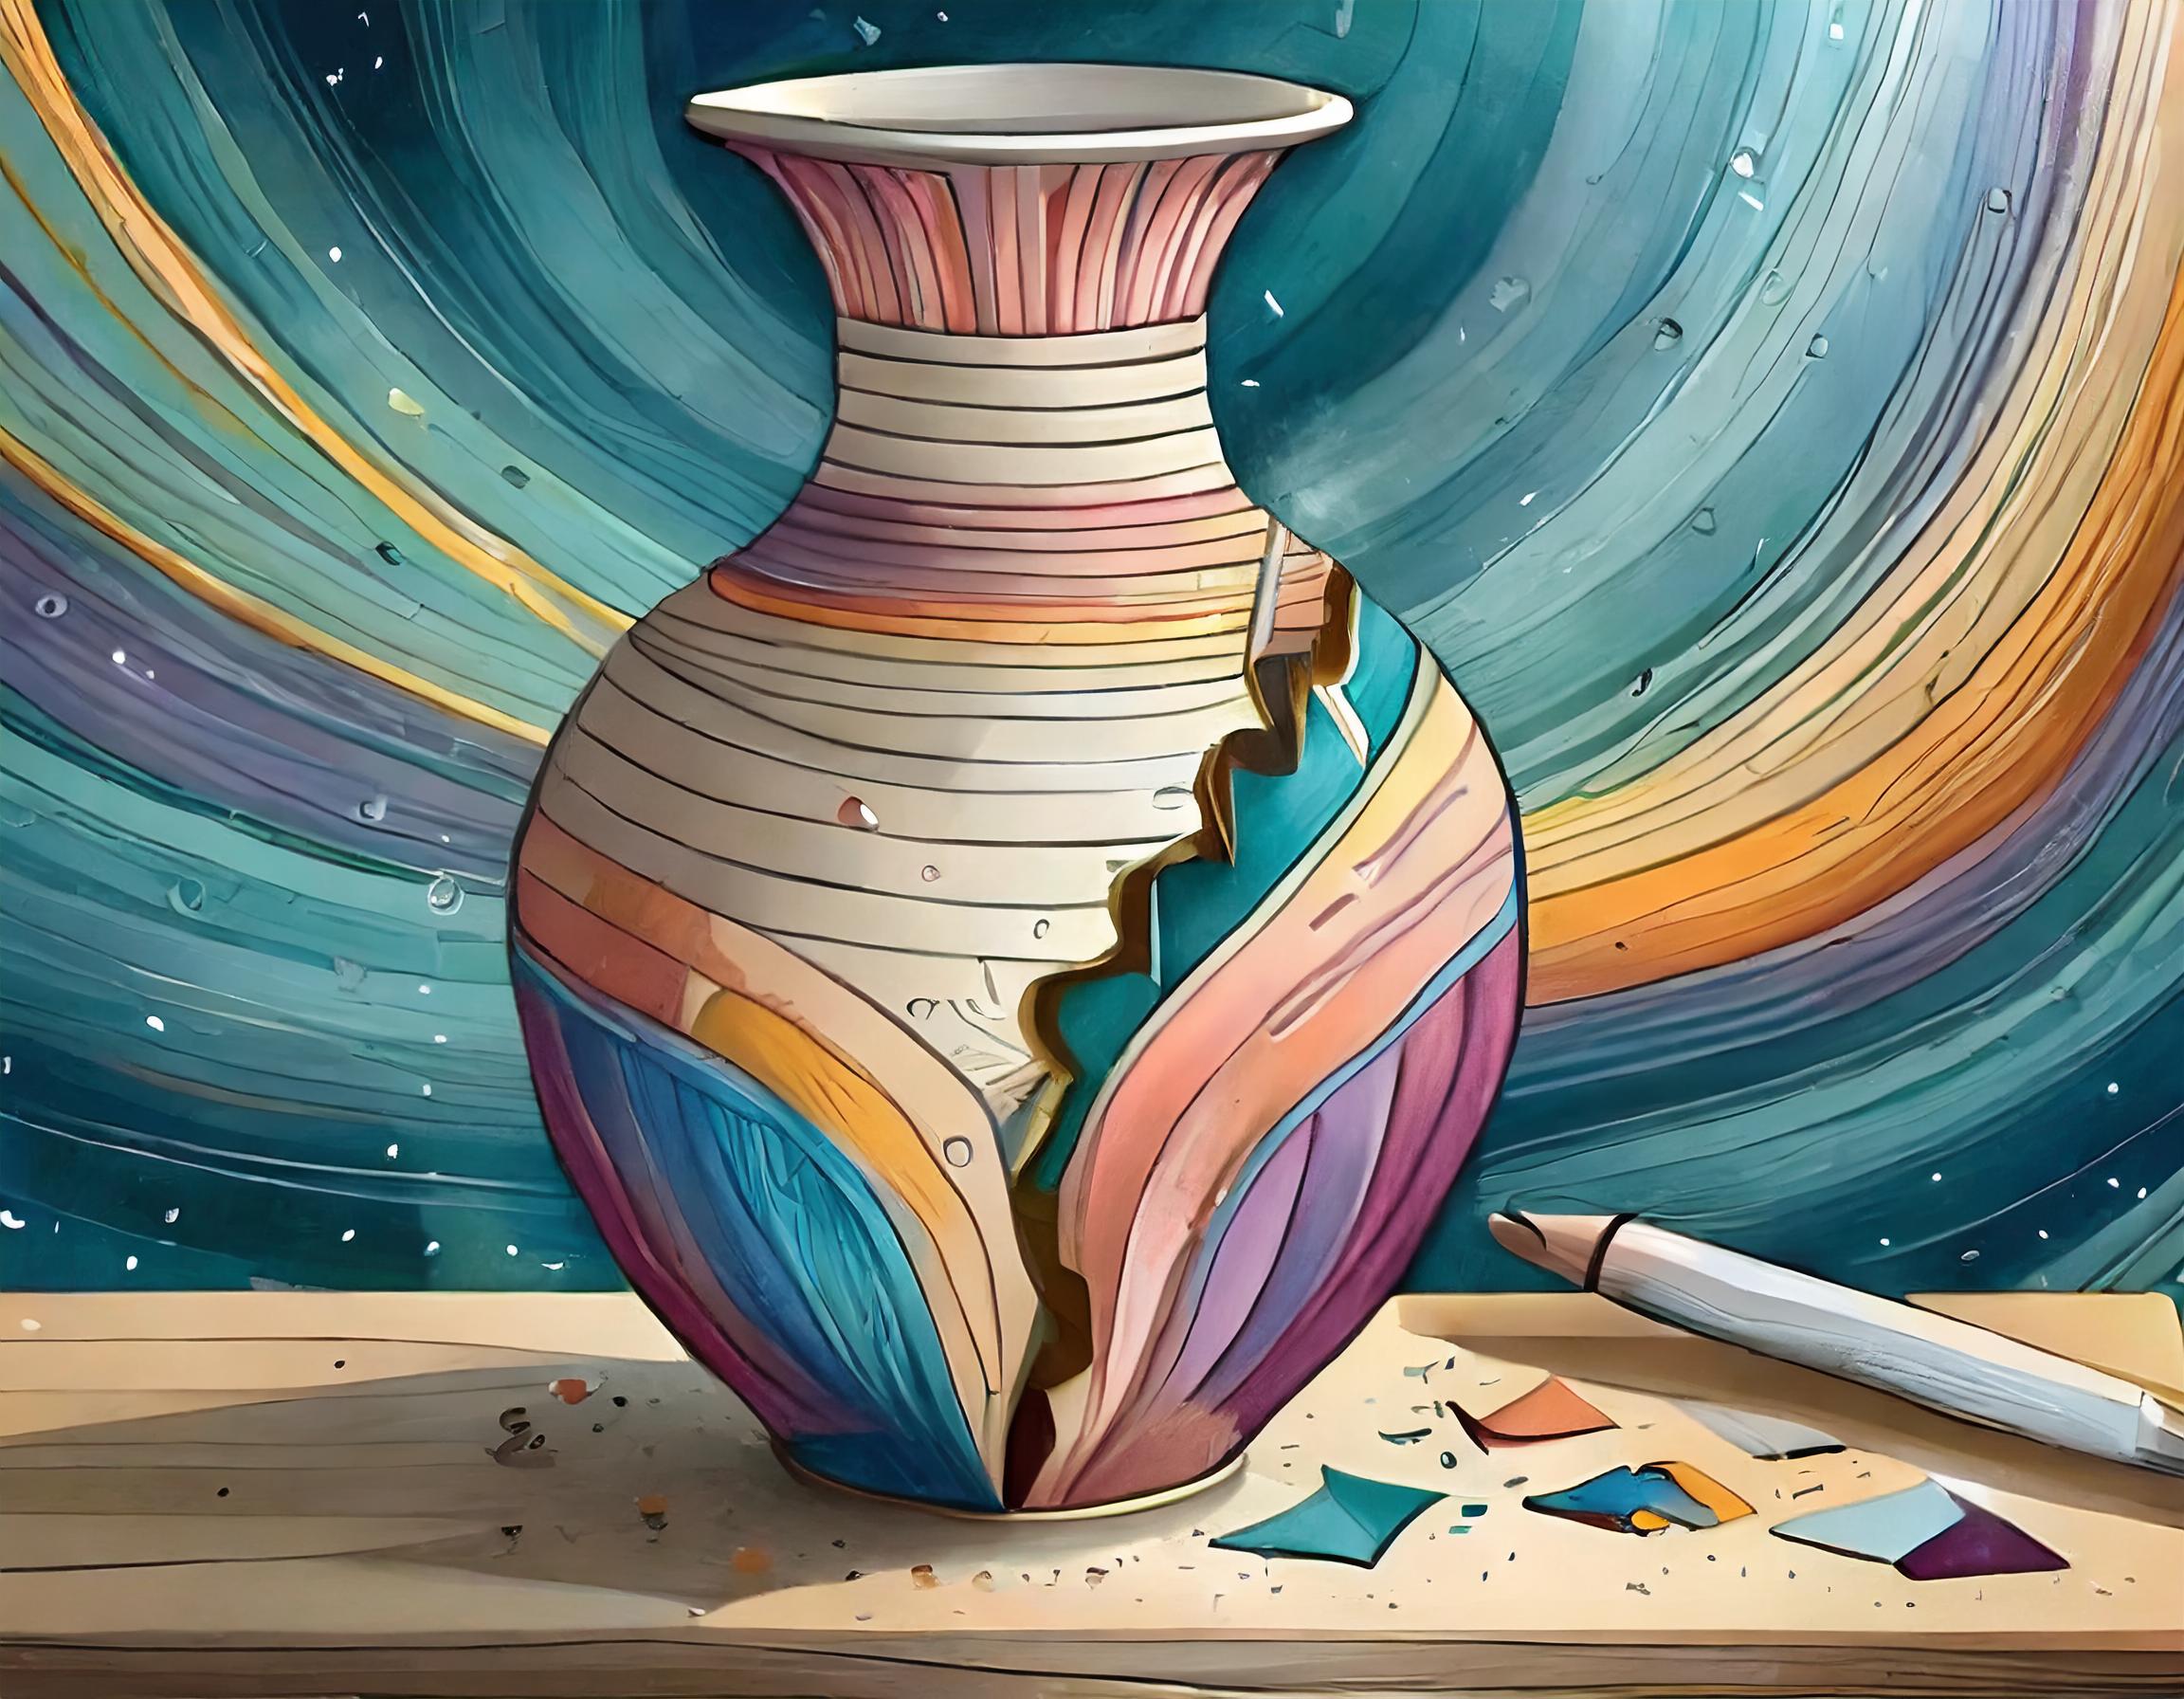 Colorful illustration of a formerly broken vase with the crack patched, symbolizing shining a light on imperfections instead of hiding them